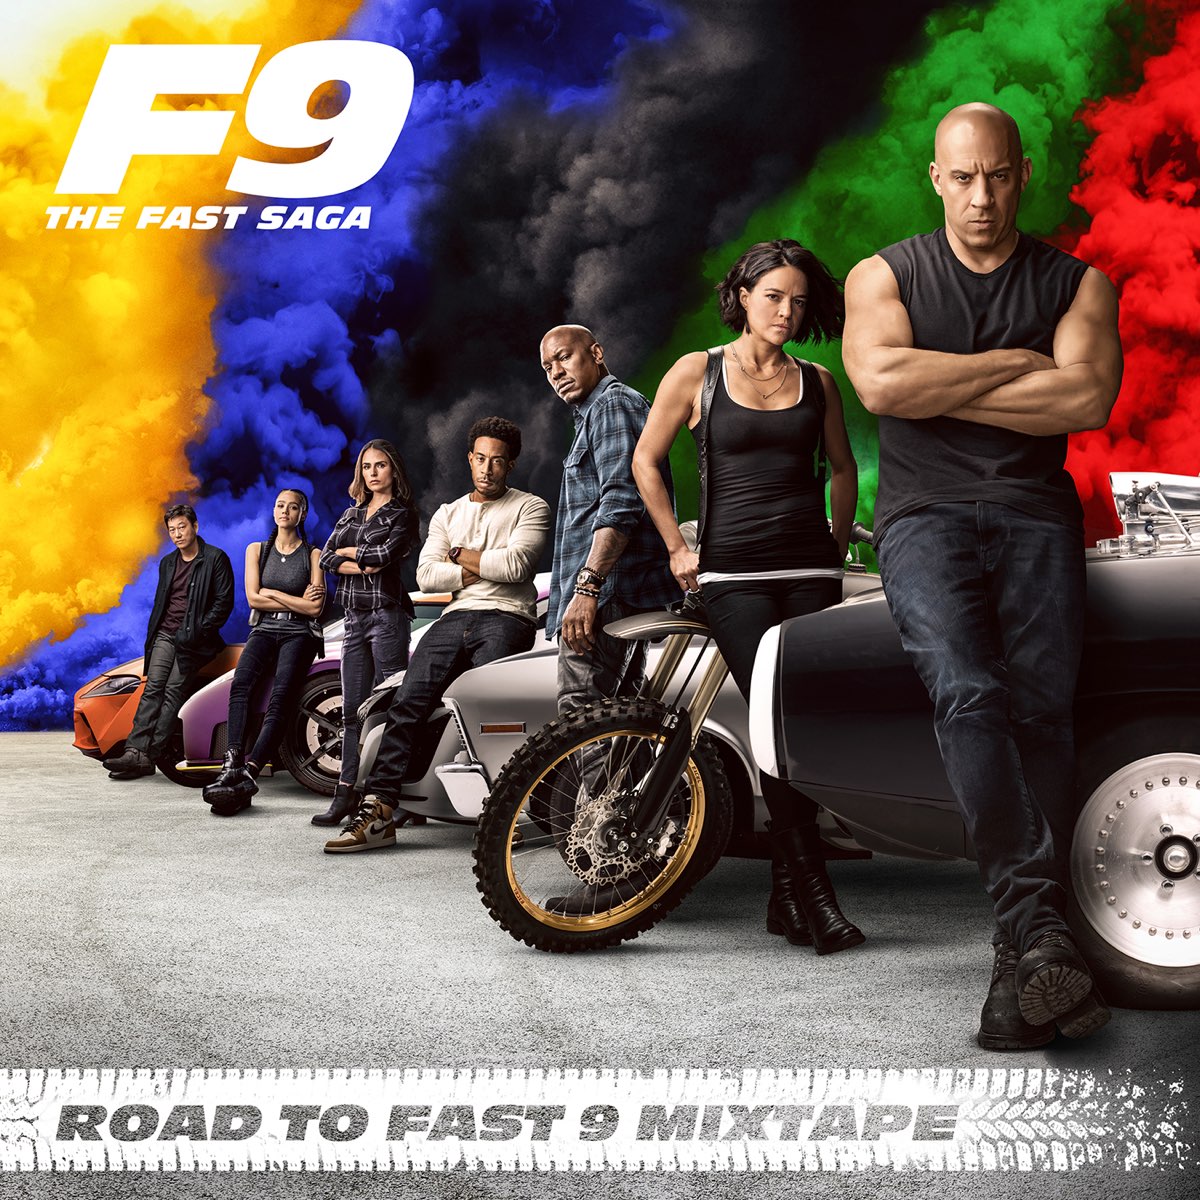 Fast and furious 9 full movie download